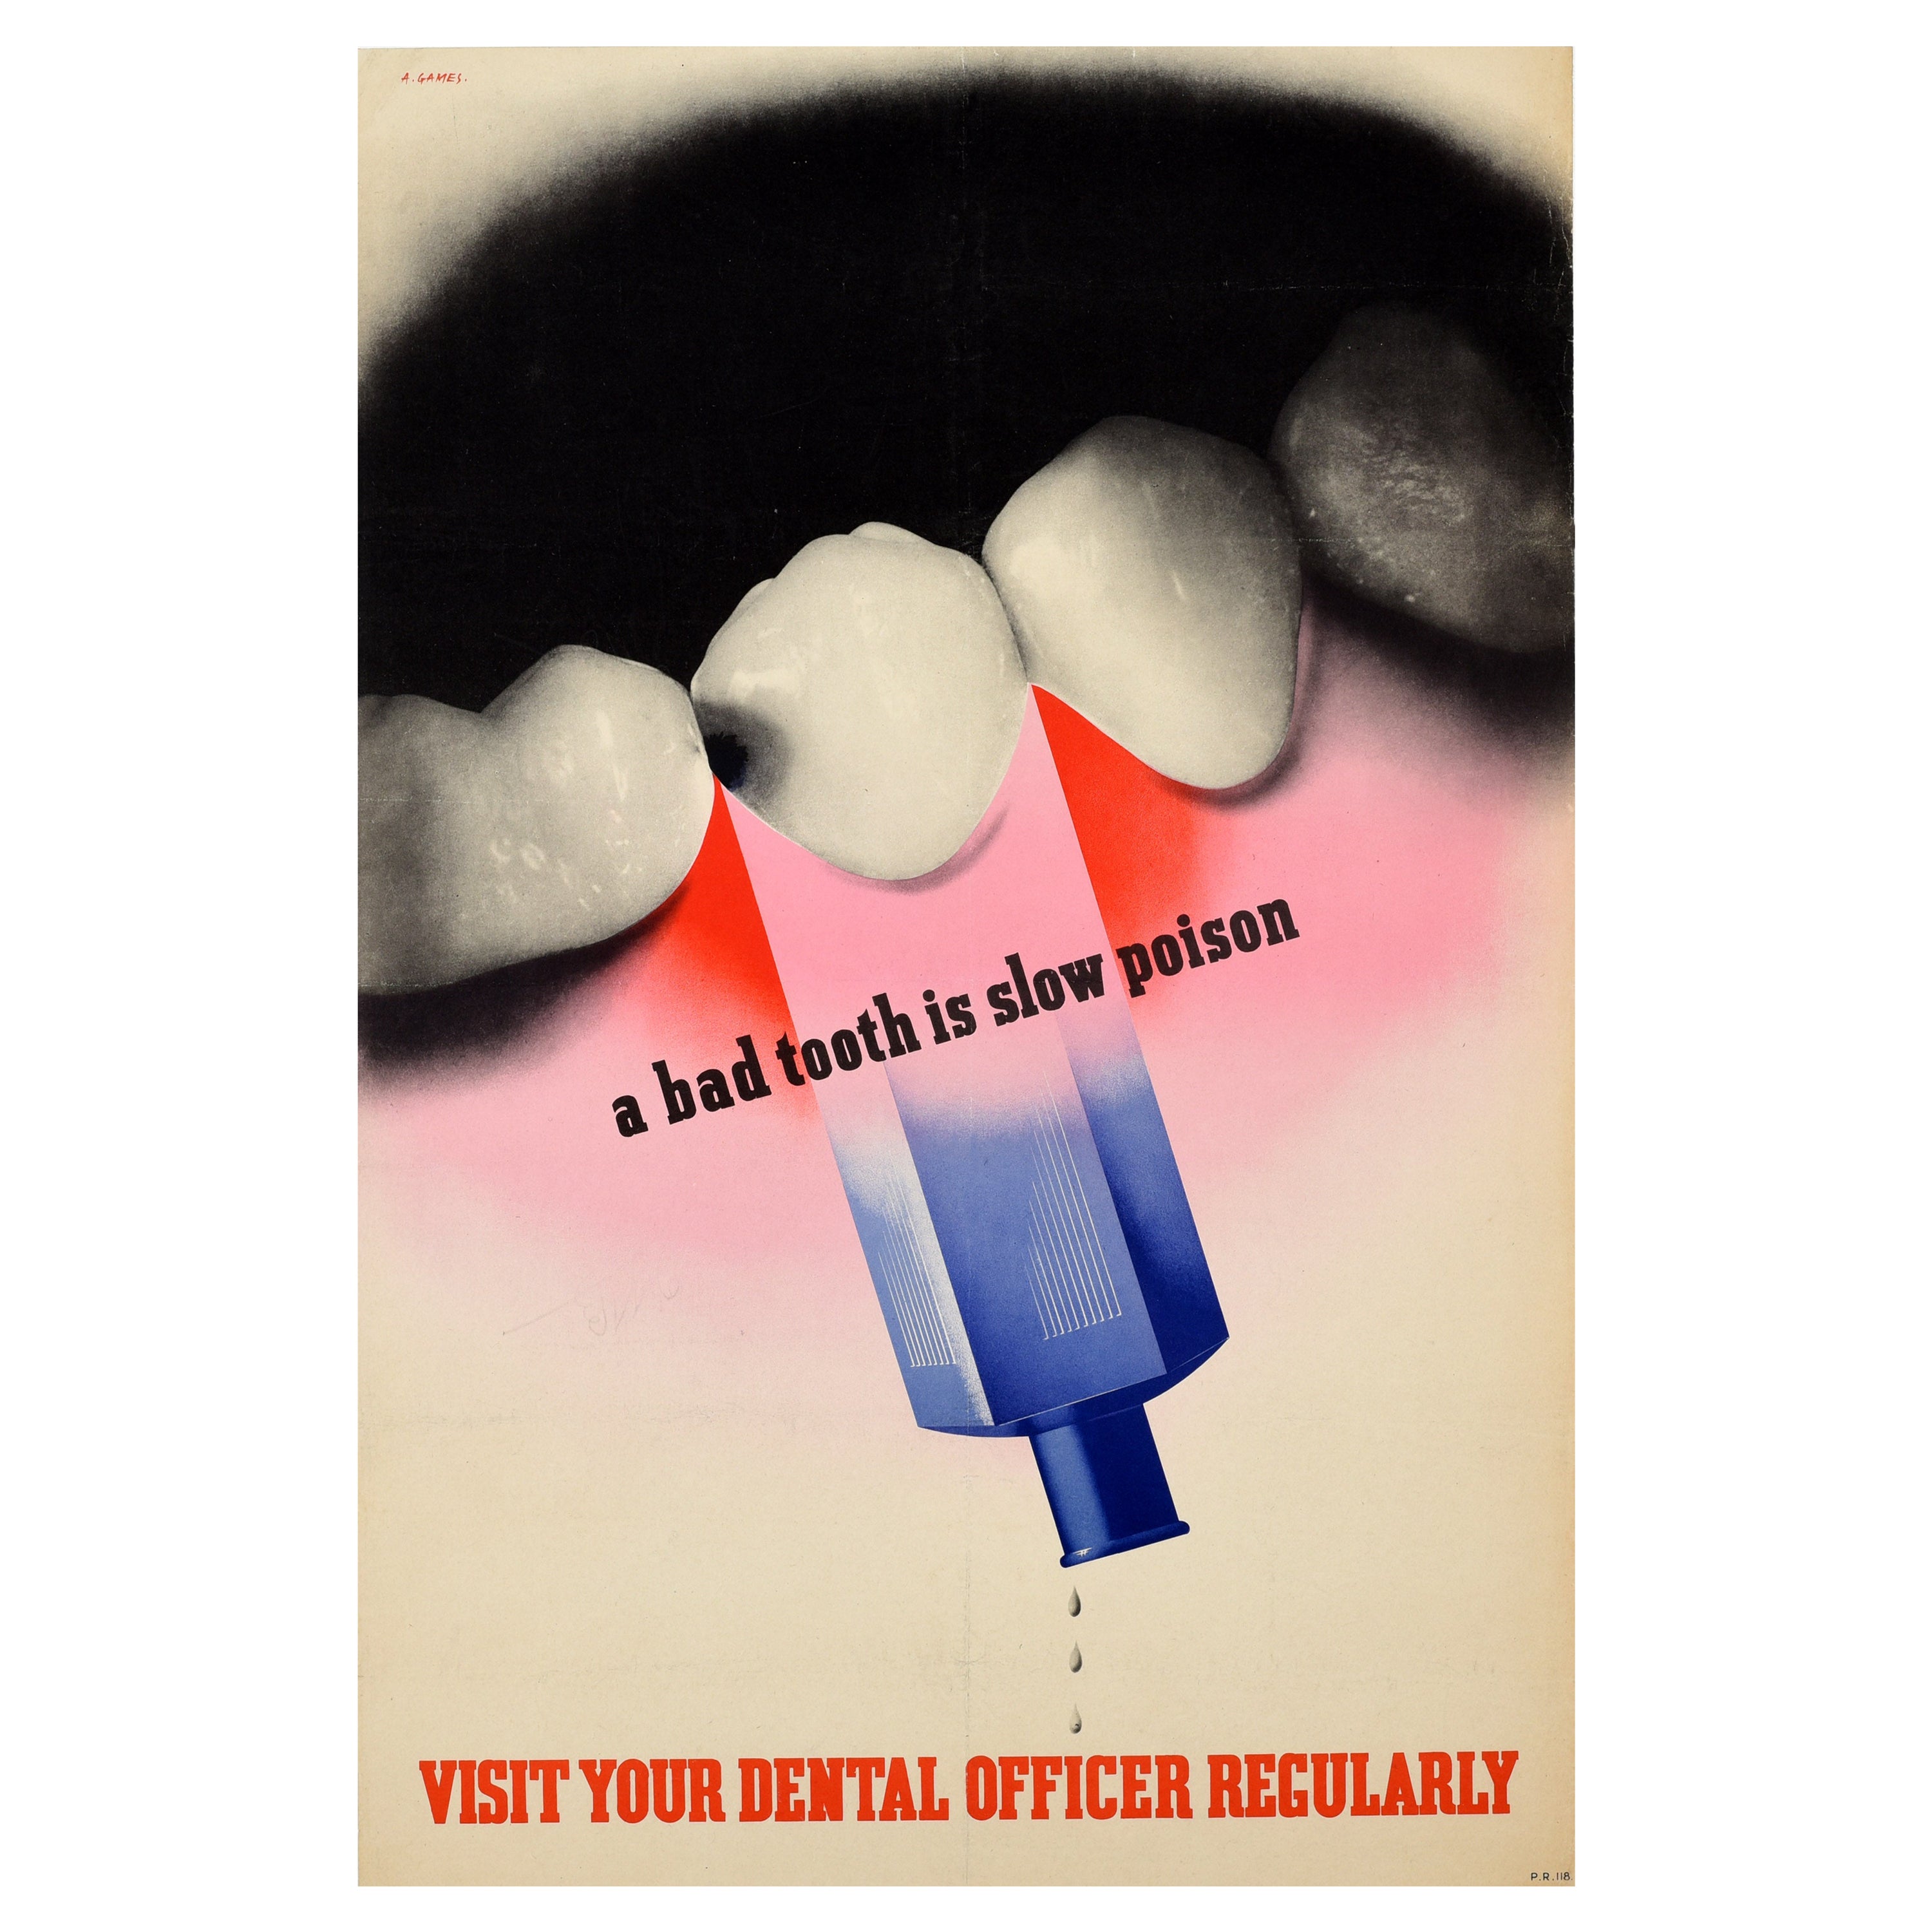 Original Vintage WWII Military Health Poster Bad Tooth Slow Poison Abram Games For Sale